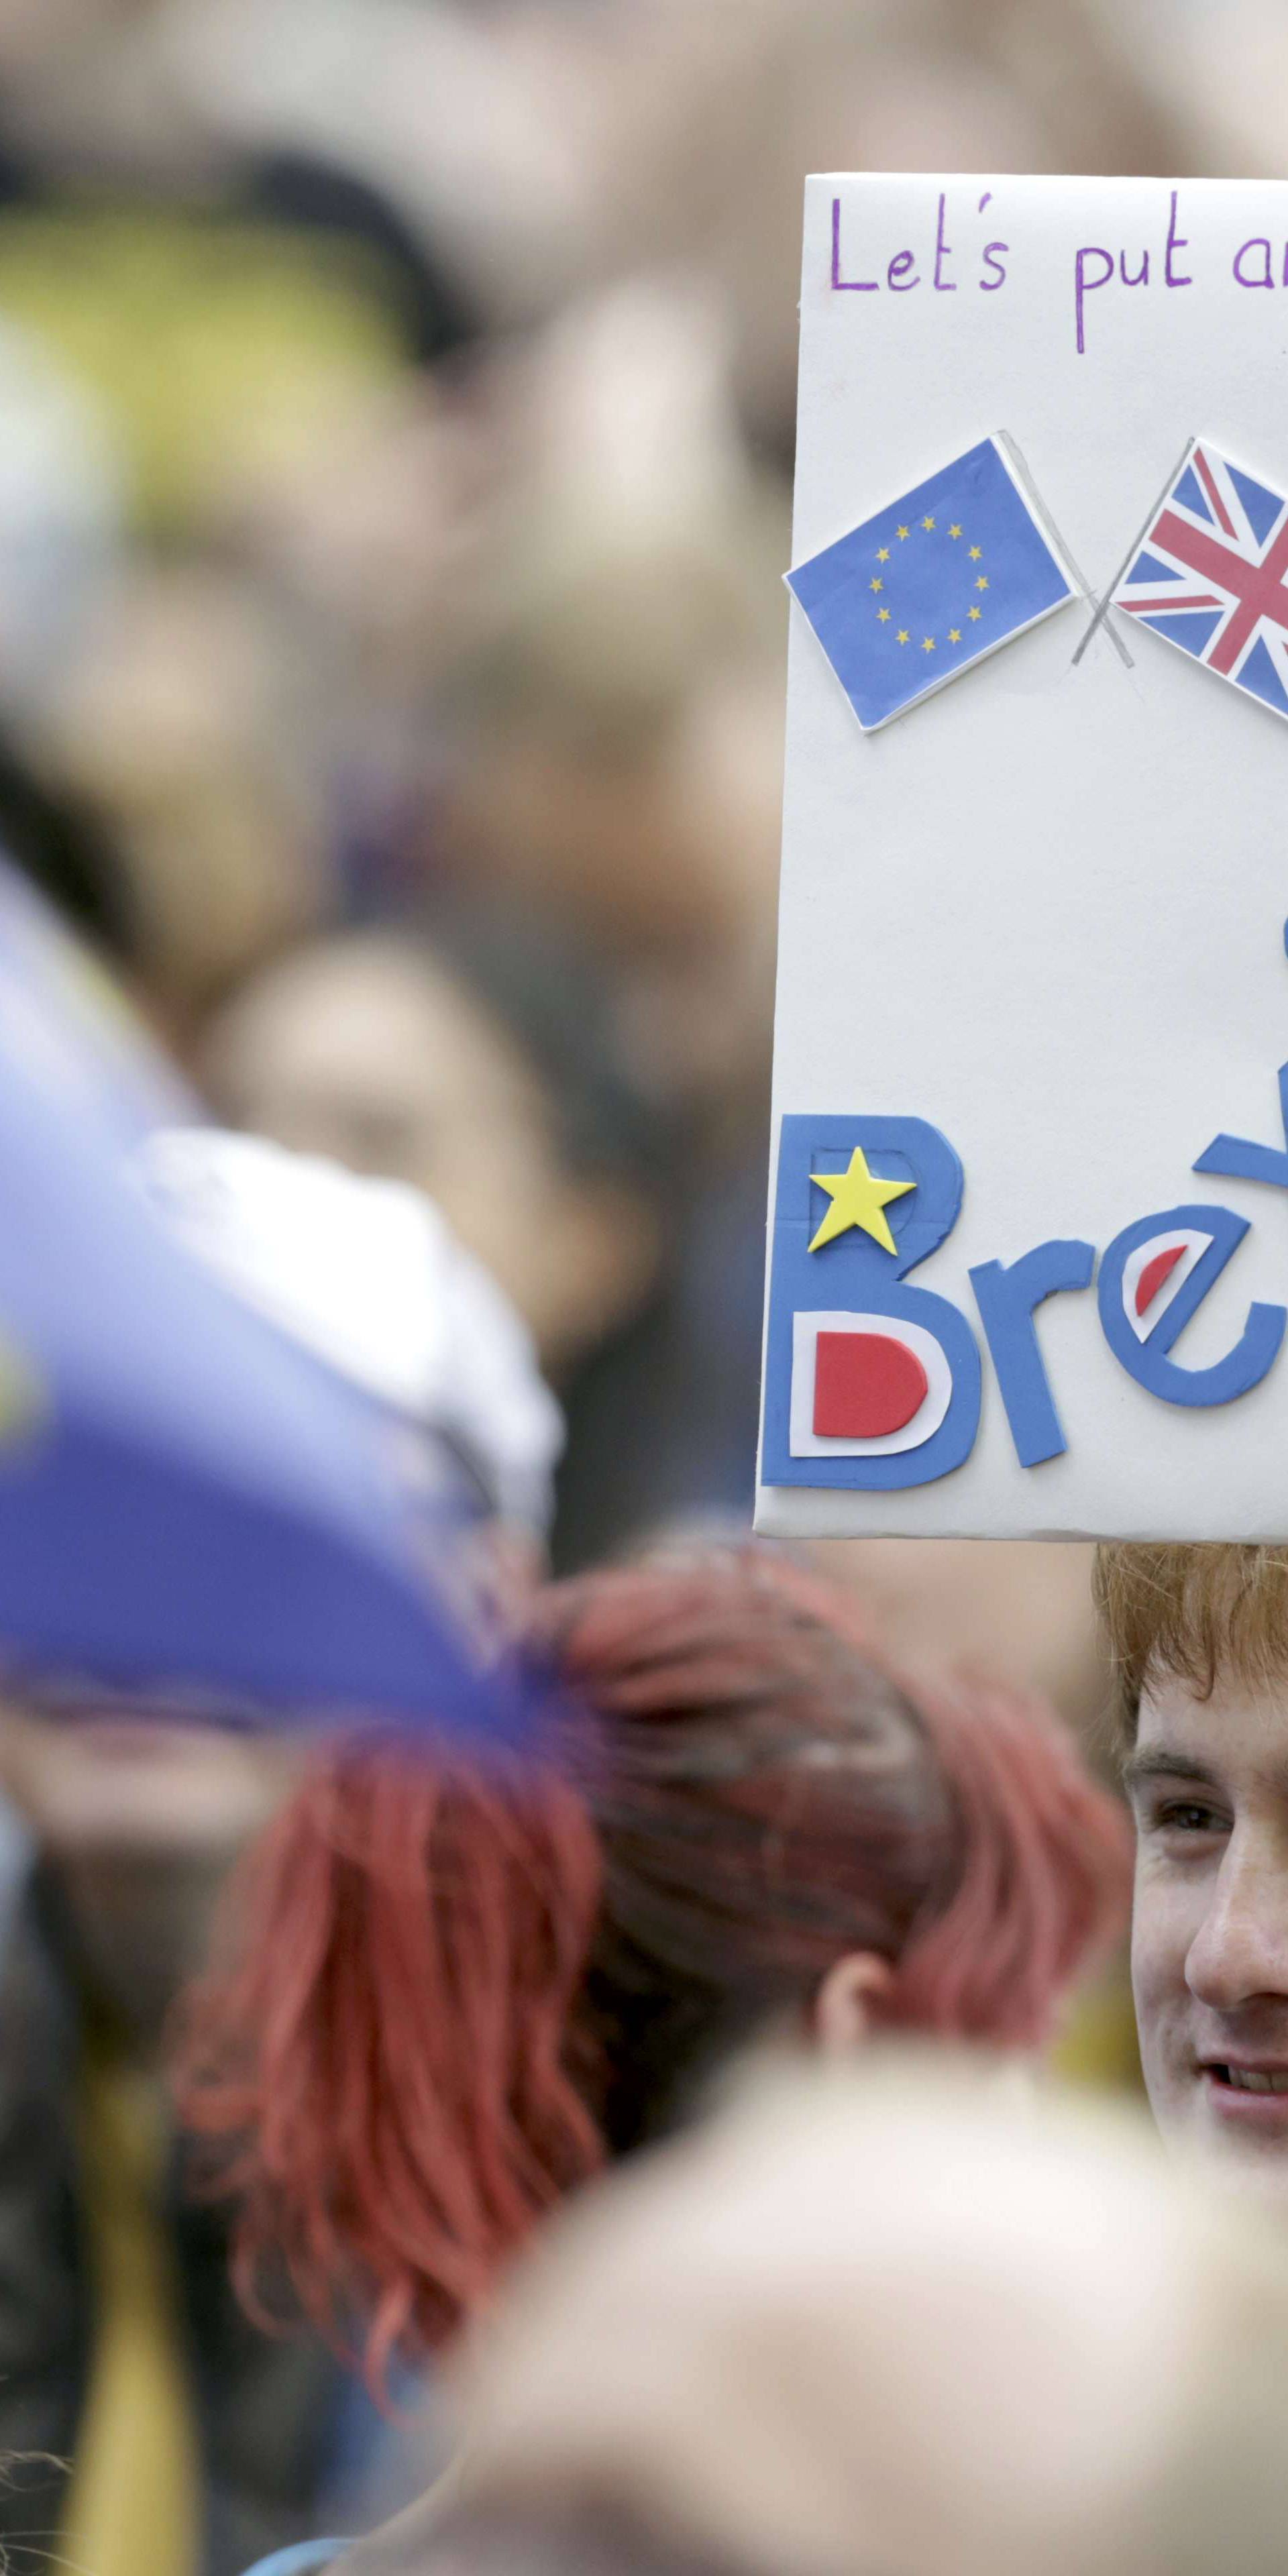 A man holds a banner during a demonstration against Britain's decision to leave the European Union, in central London